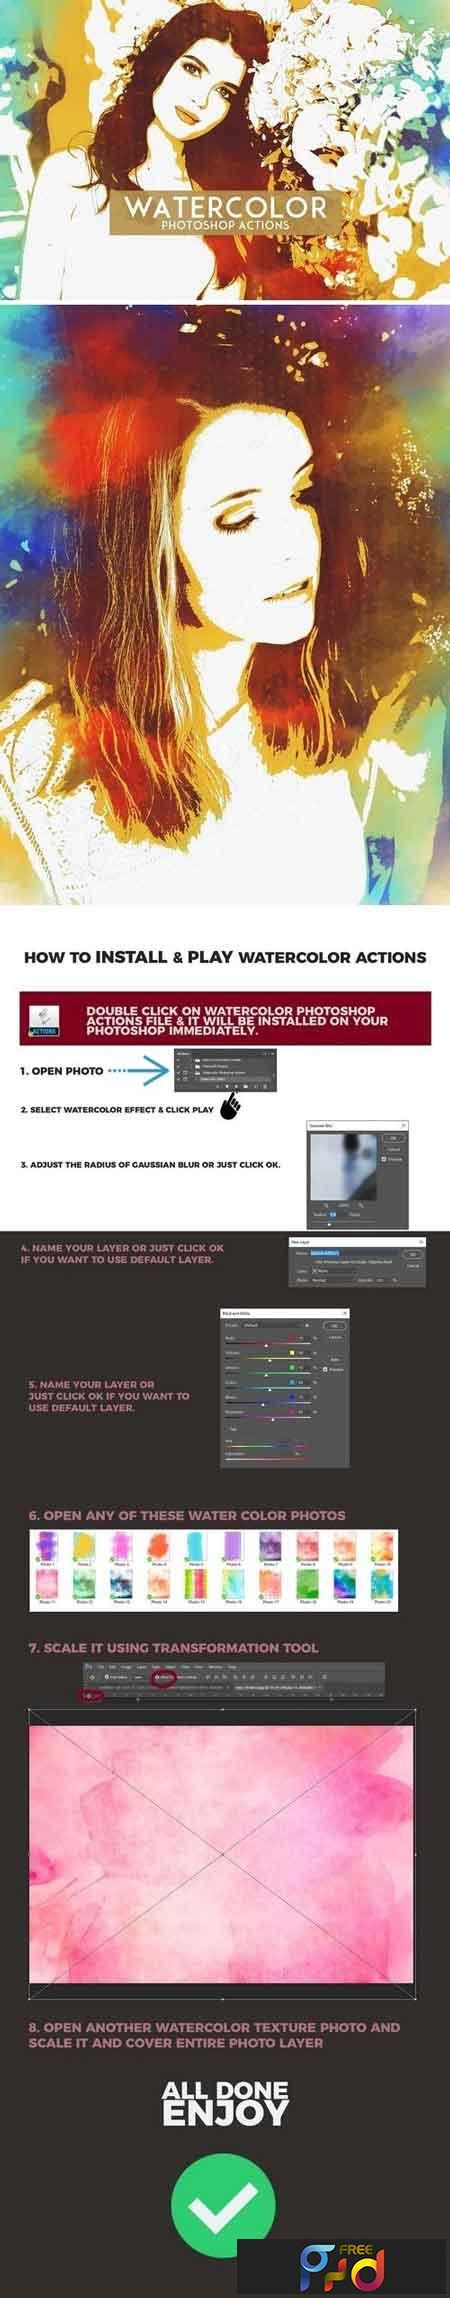 Watercolor Photoshop Actions 1201680 1